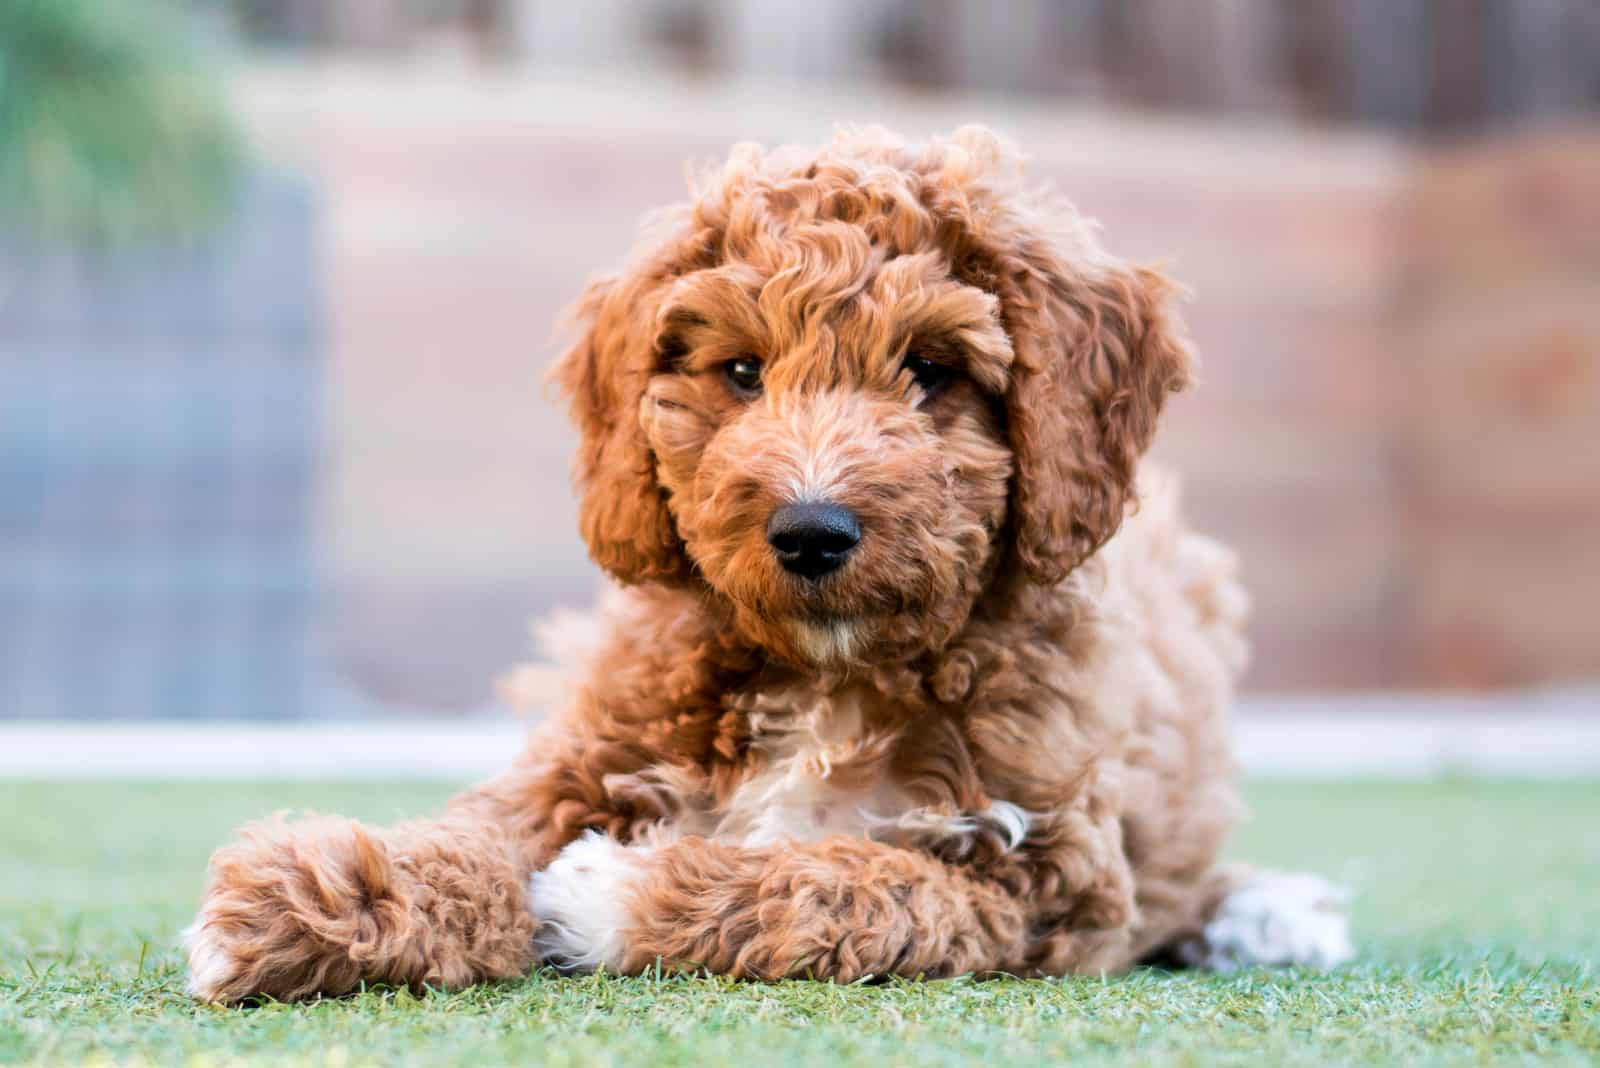 Goldendoodle lies on the grass and looks at the camera